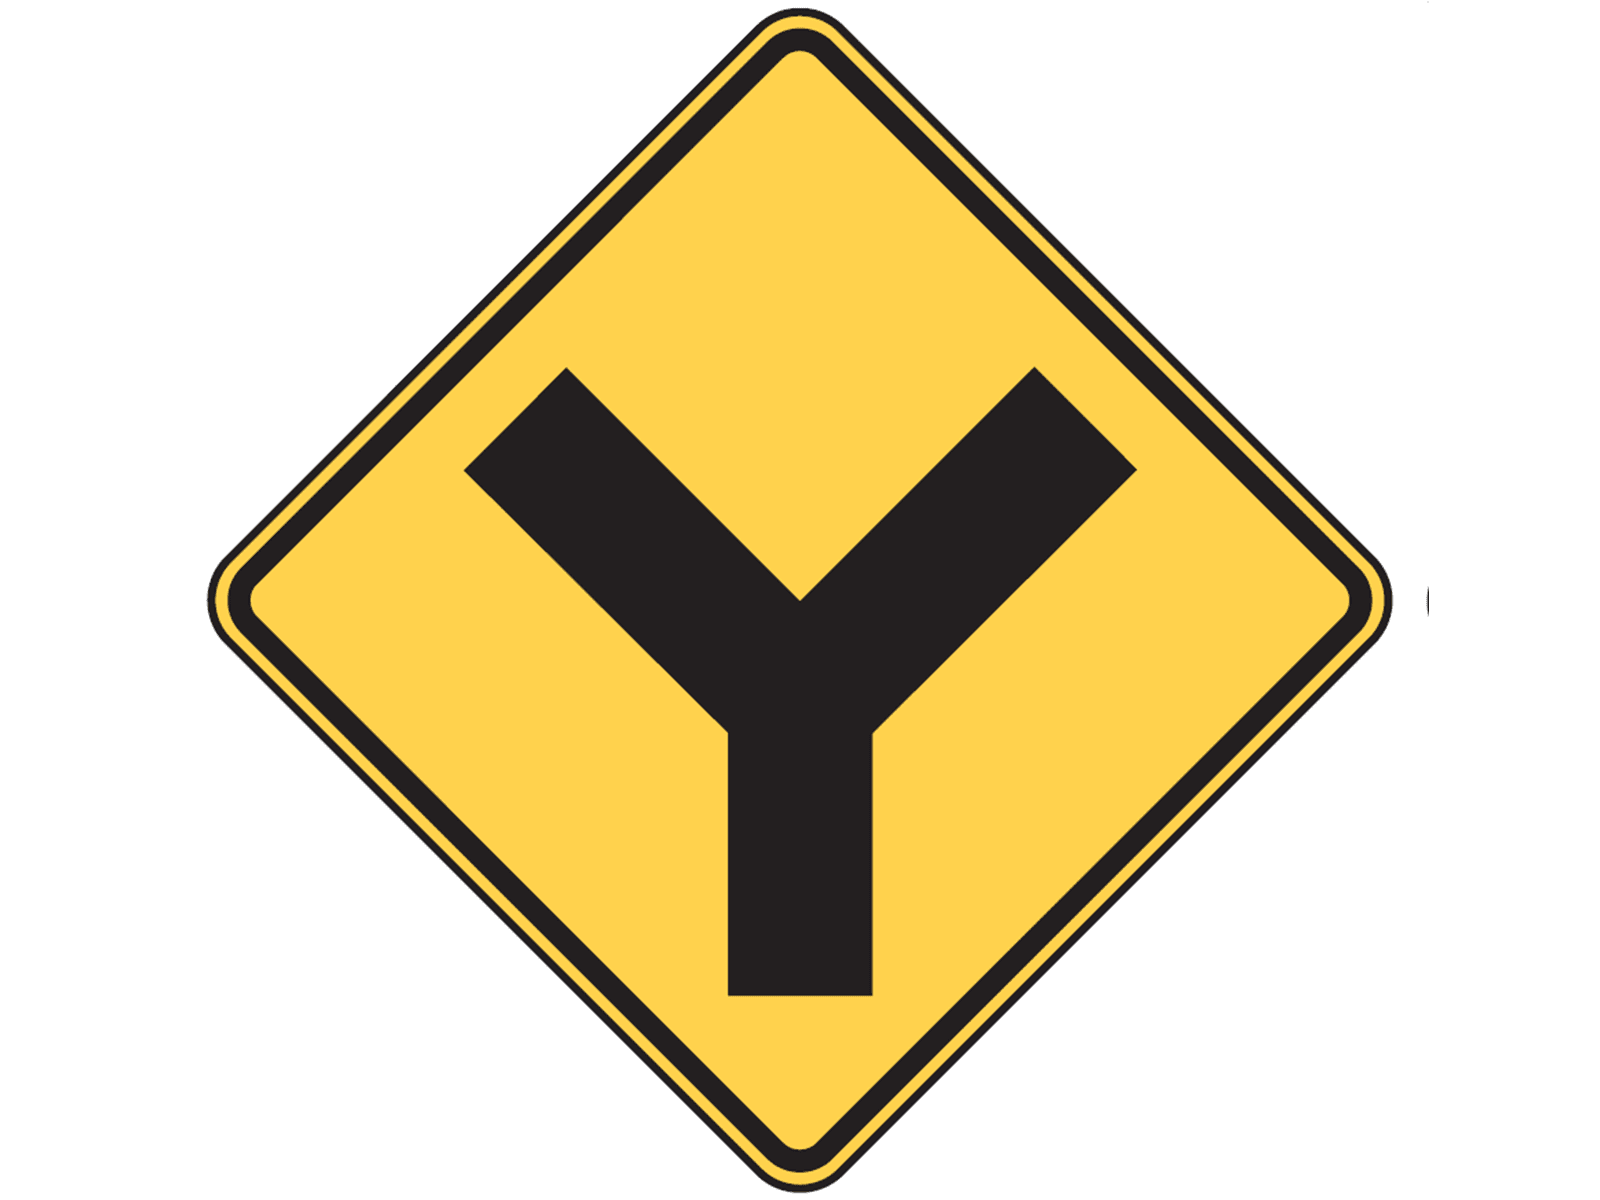 Y-Intersection W2-5 - W2: Intersections